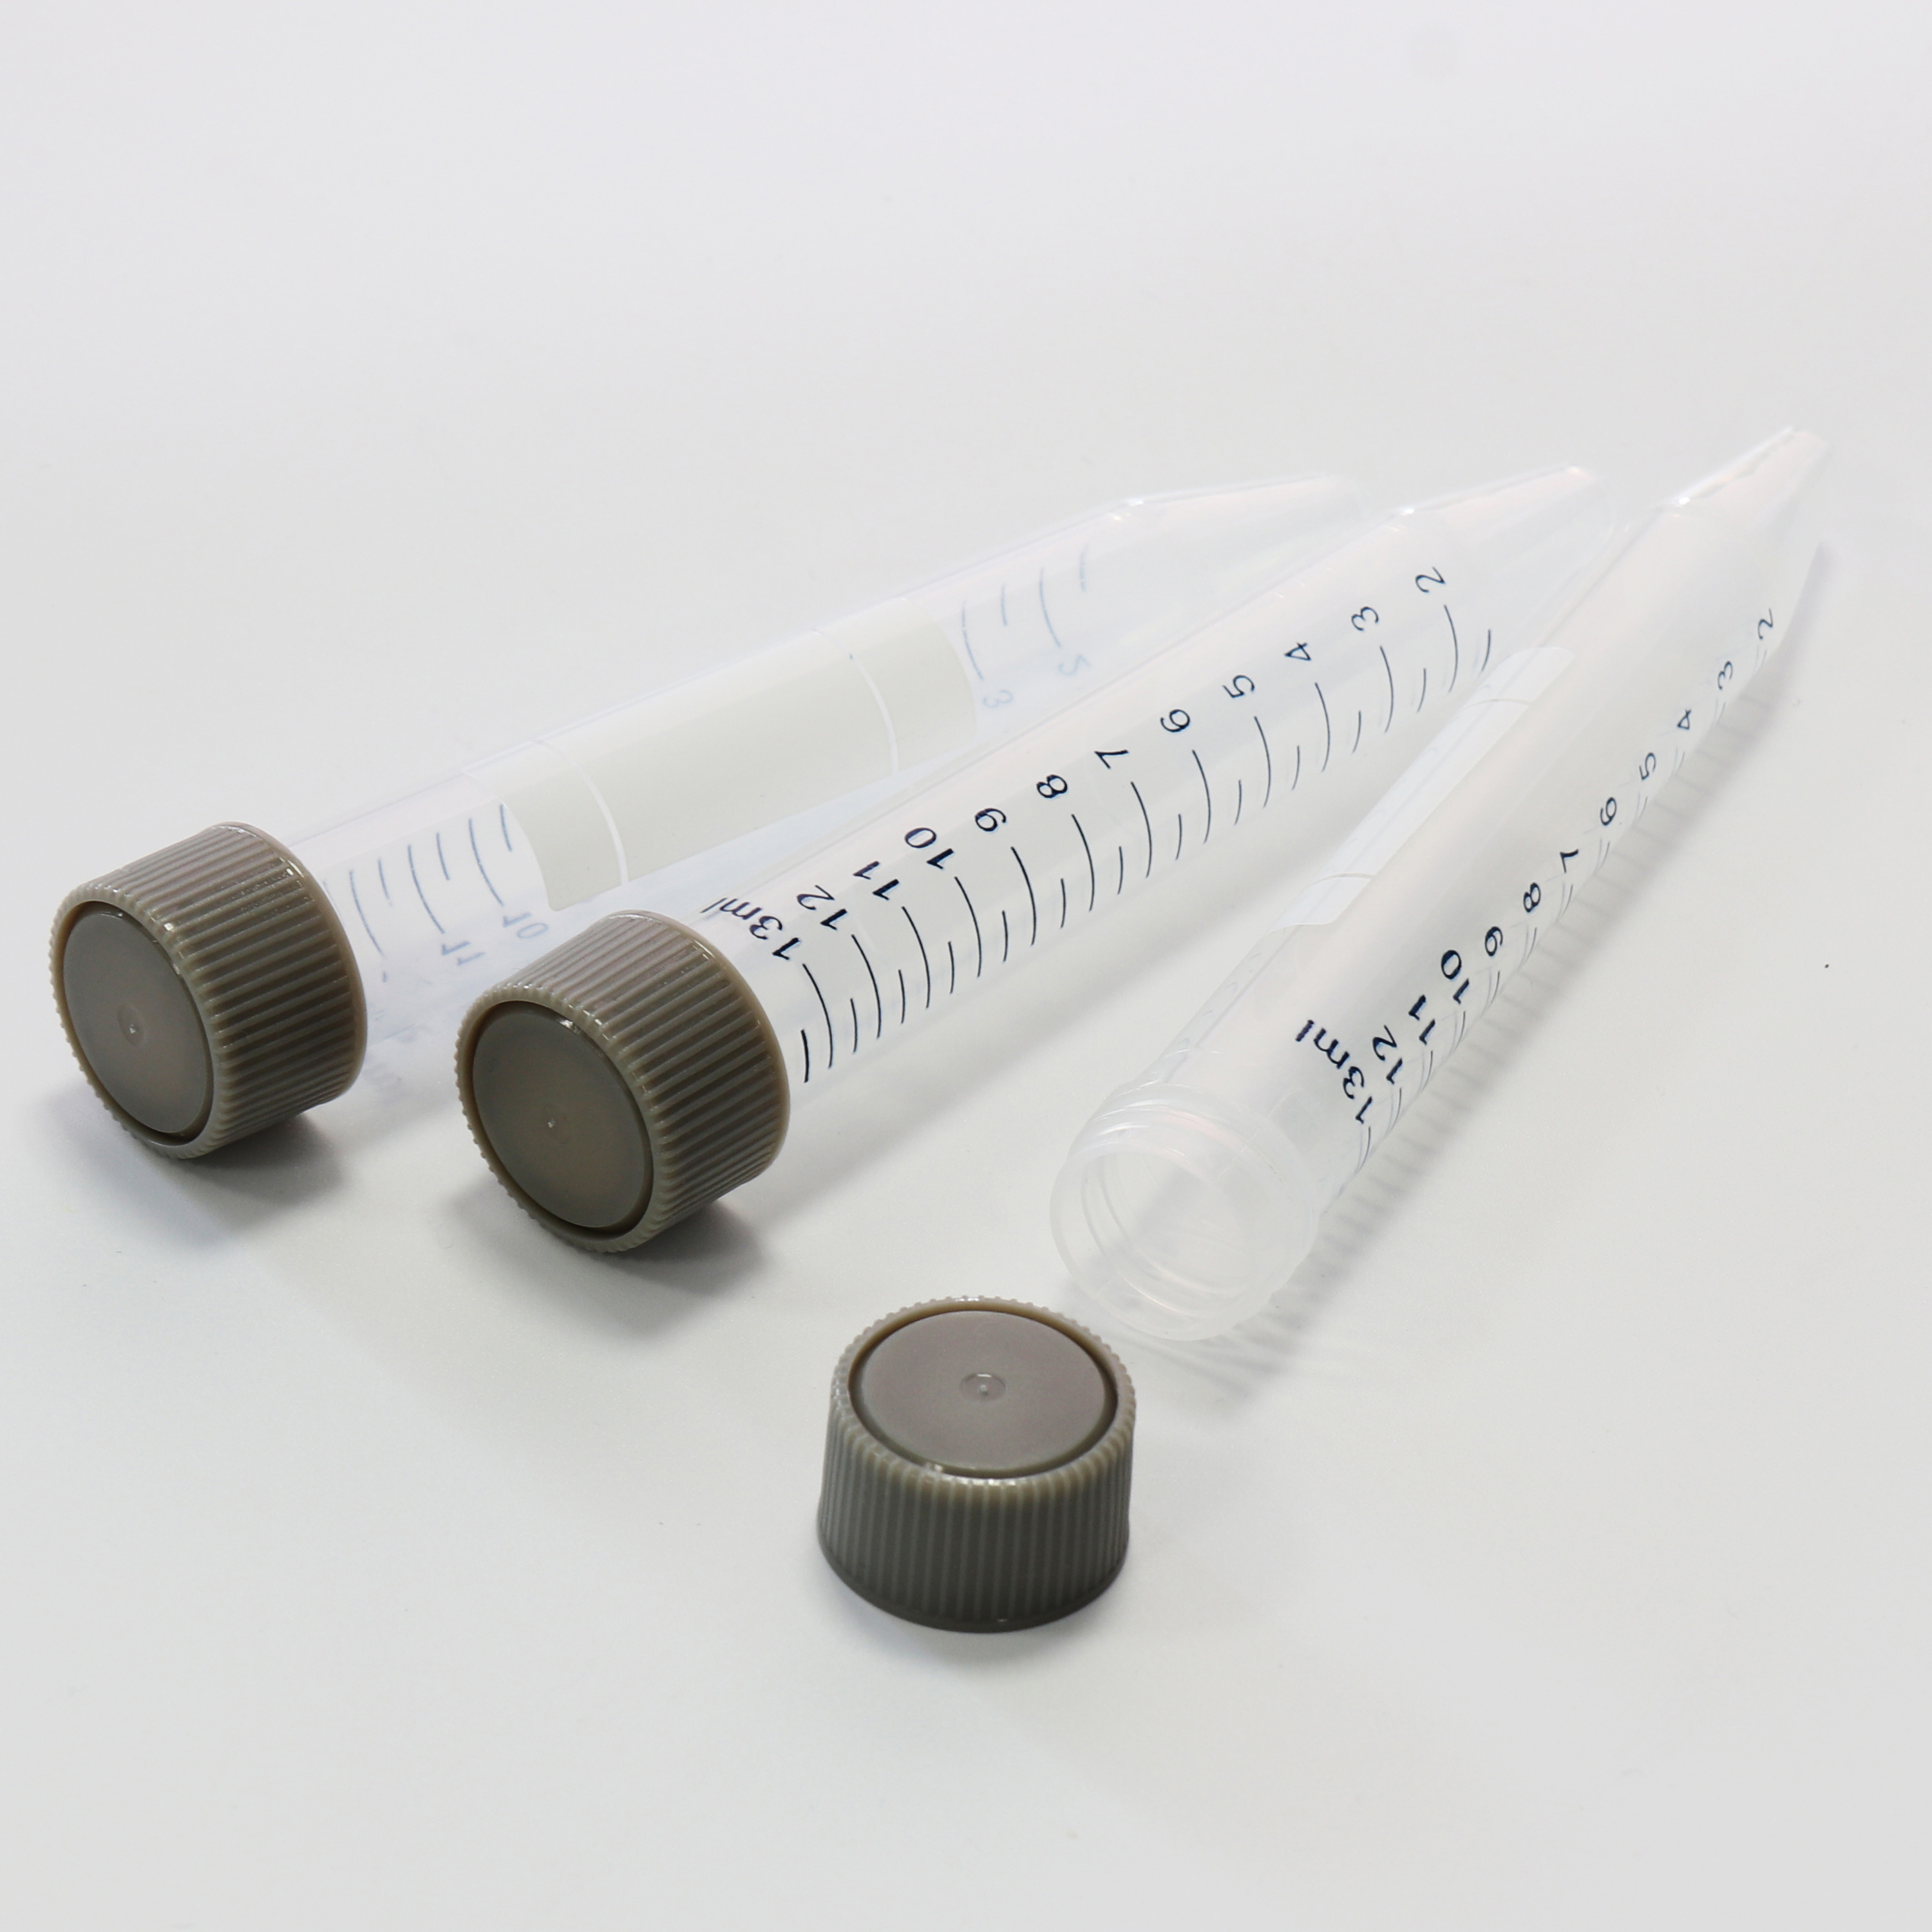 ULAB Autoclavable Polypropylene Centrifuge Tubes, Falcon Tubes, Vol.15ml 17x120mm, Blue Printed Graduated Marks from 1.5ml to 13ml, Assembled Leak-Proof Screw Cap, Gamma Sterile, Pack of 25, UCT1001